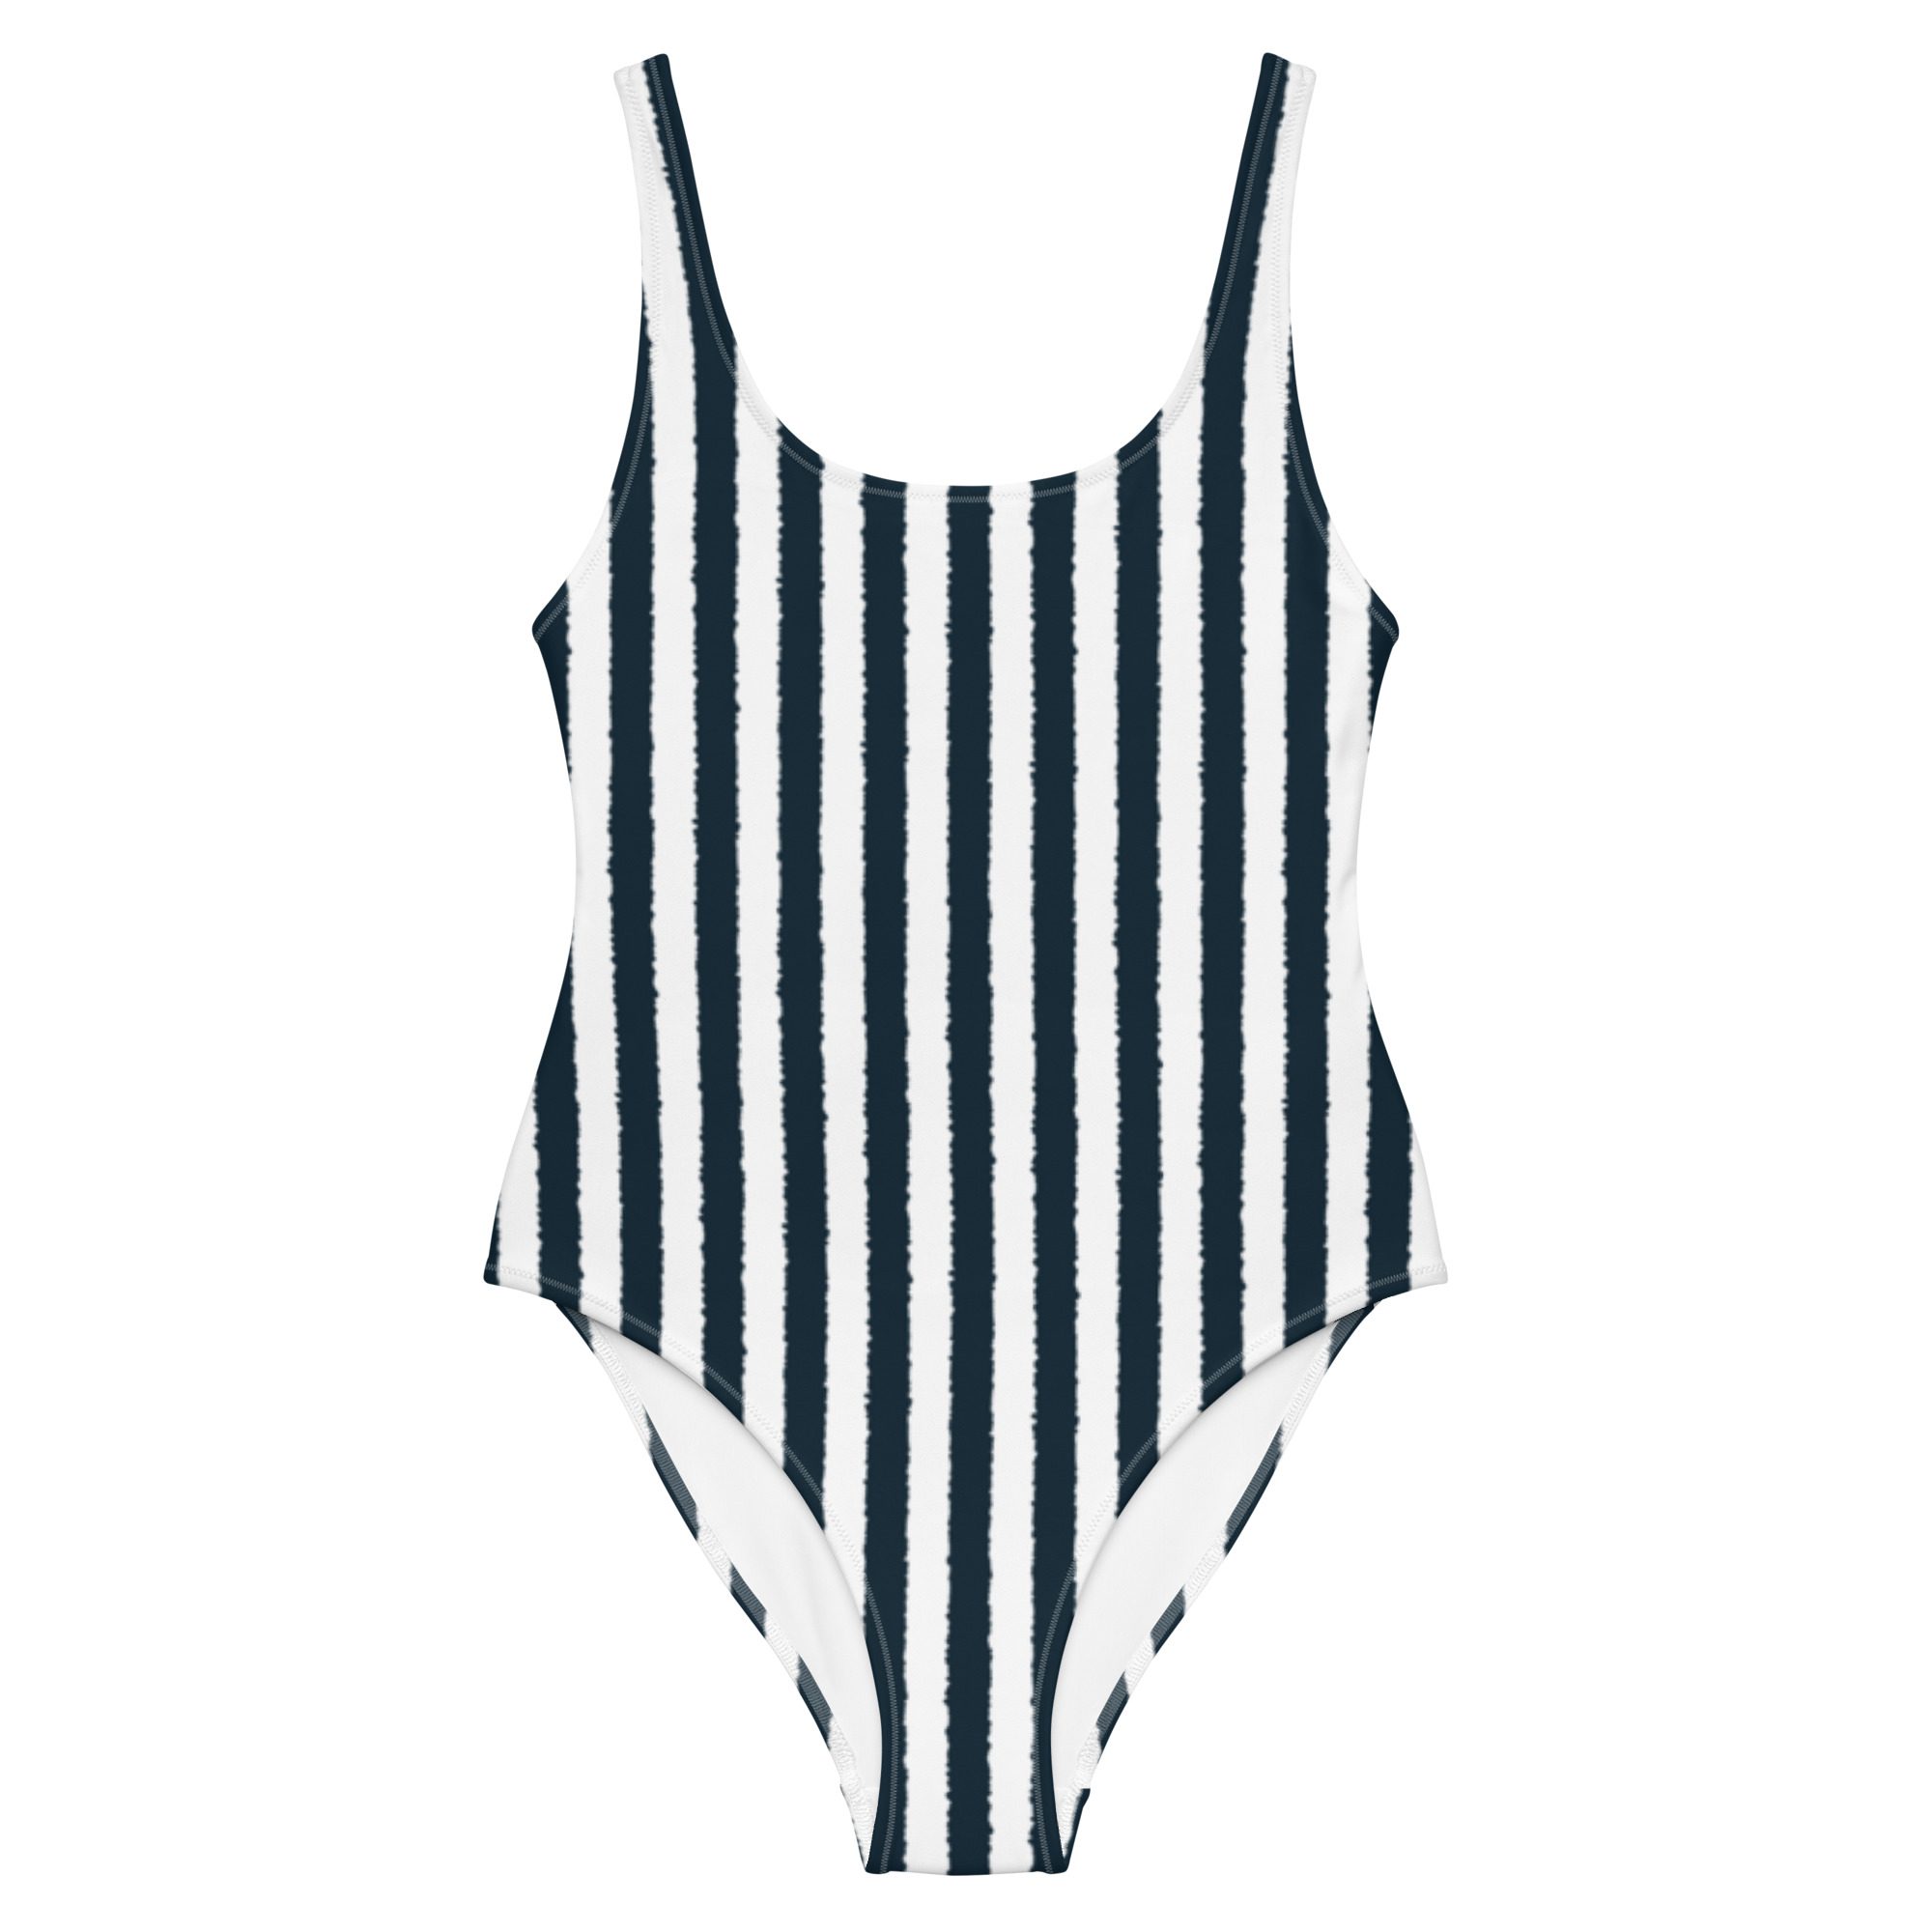 Women’s One-Piece Smooth Elasticity Swimsuits - LEISFRE